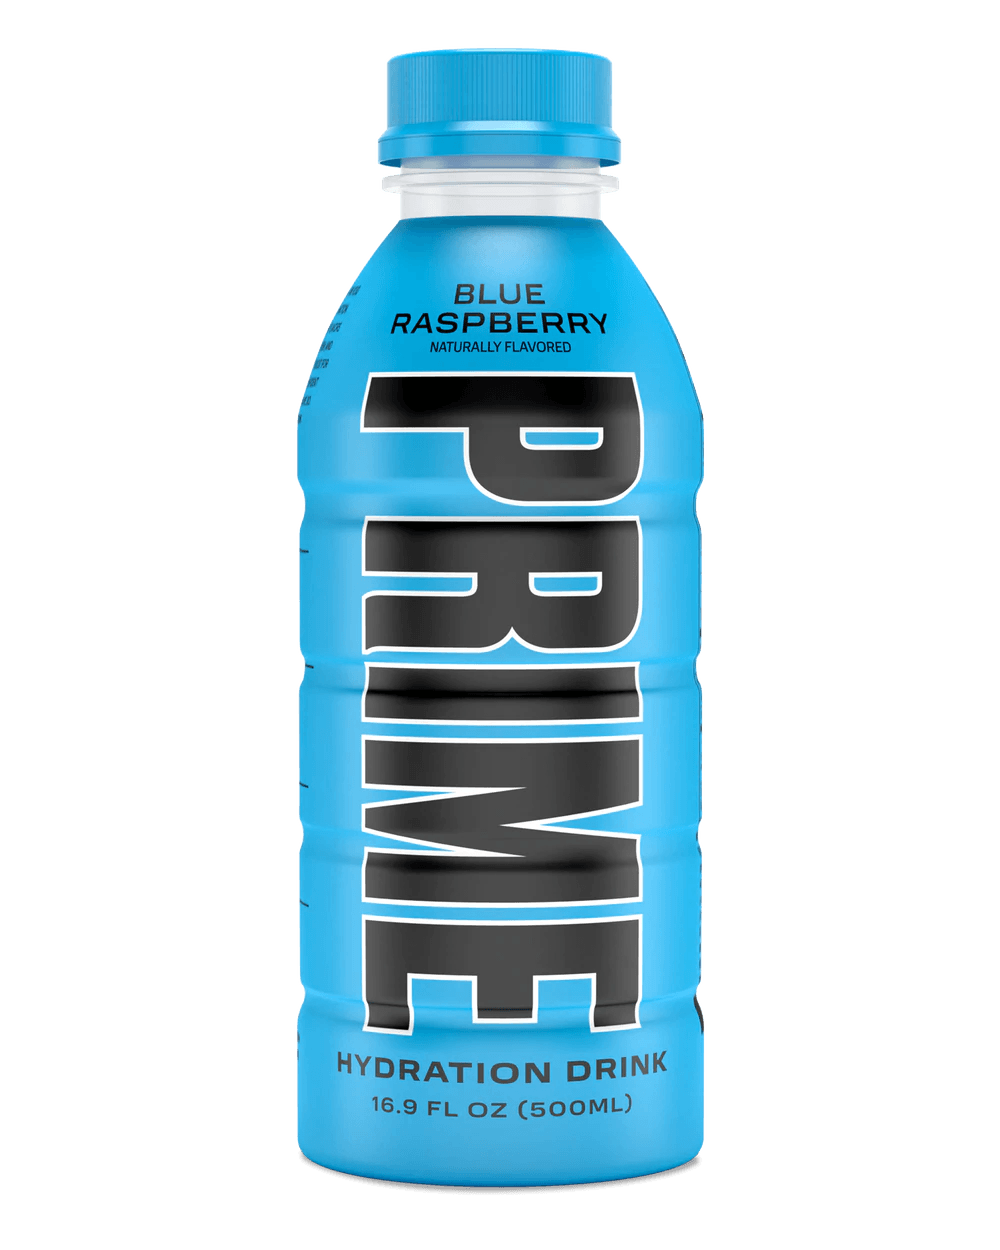 PRIME Hydration is coming to Switzerland later this year - Conaxess Trade